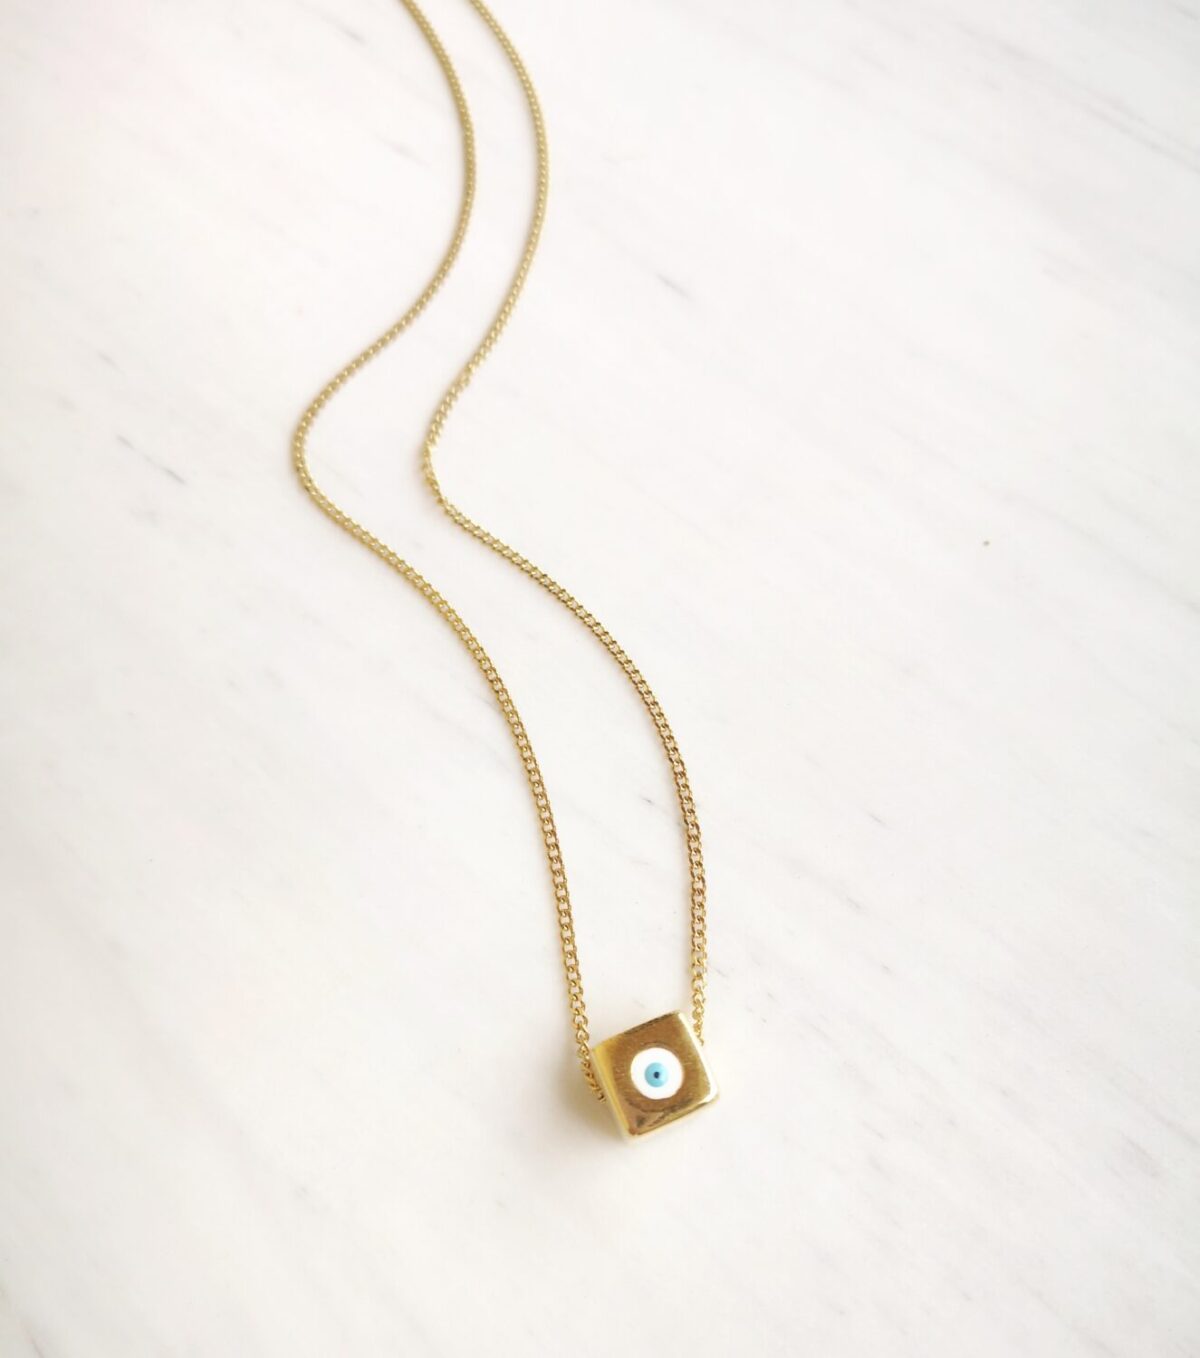 Turqoise Cube Charm necklace